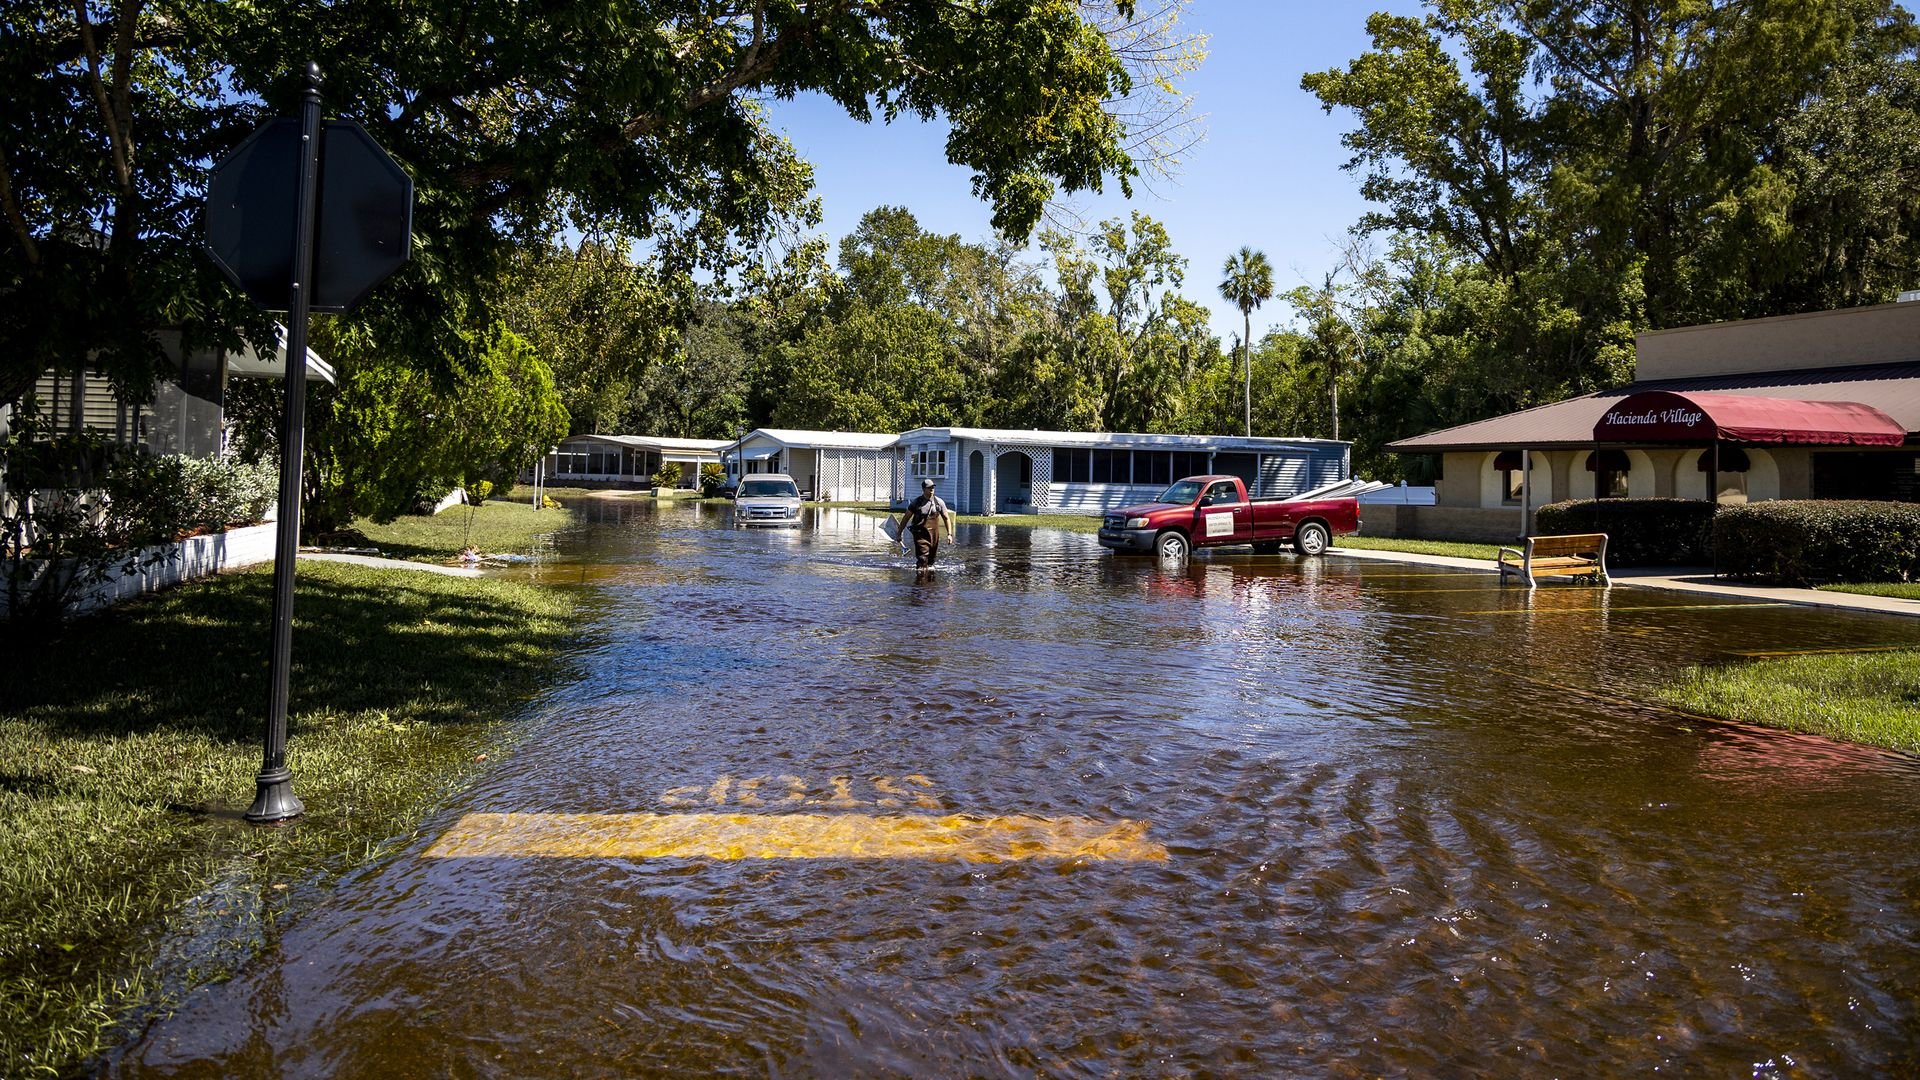 Central Florida floodwaters rising after Ian unleashed "unprecedented rainfall"